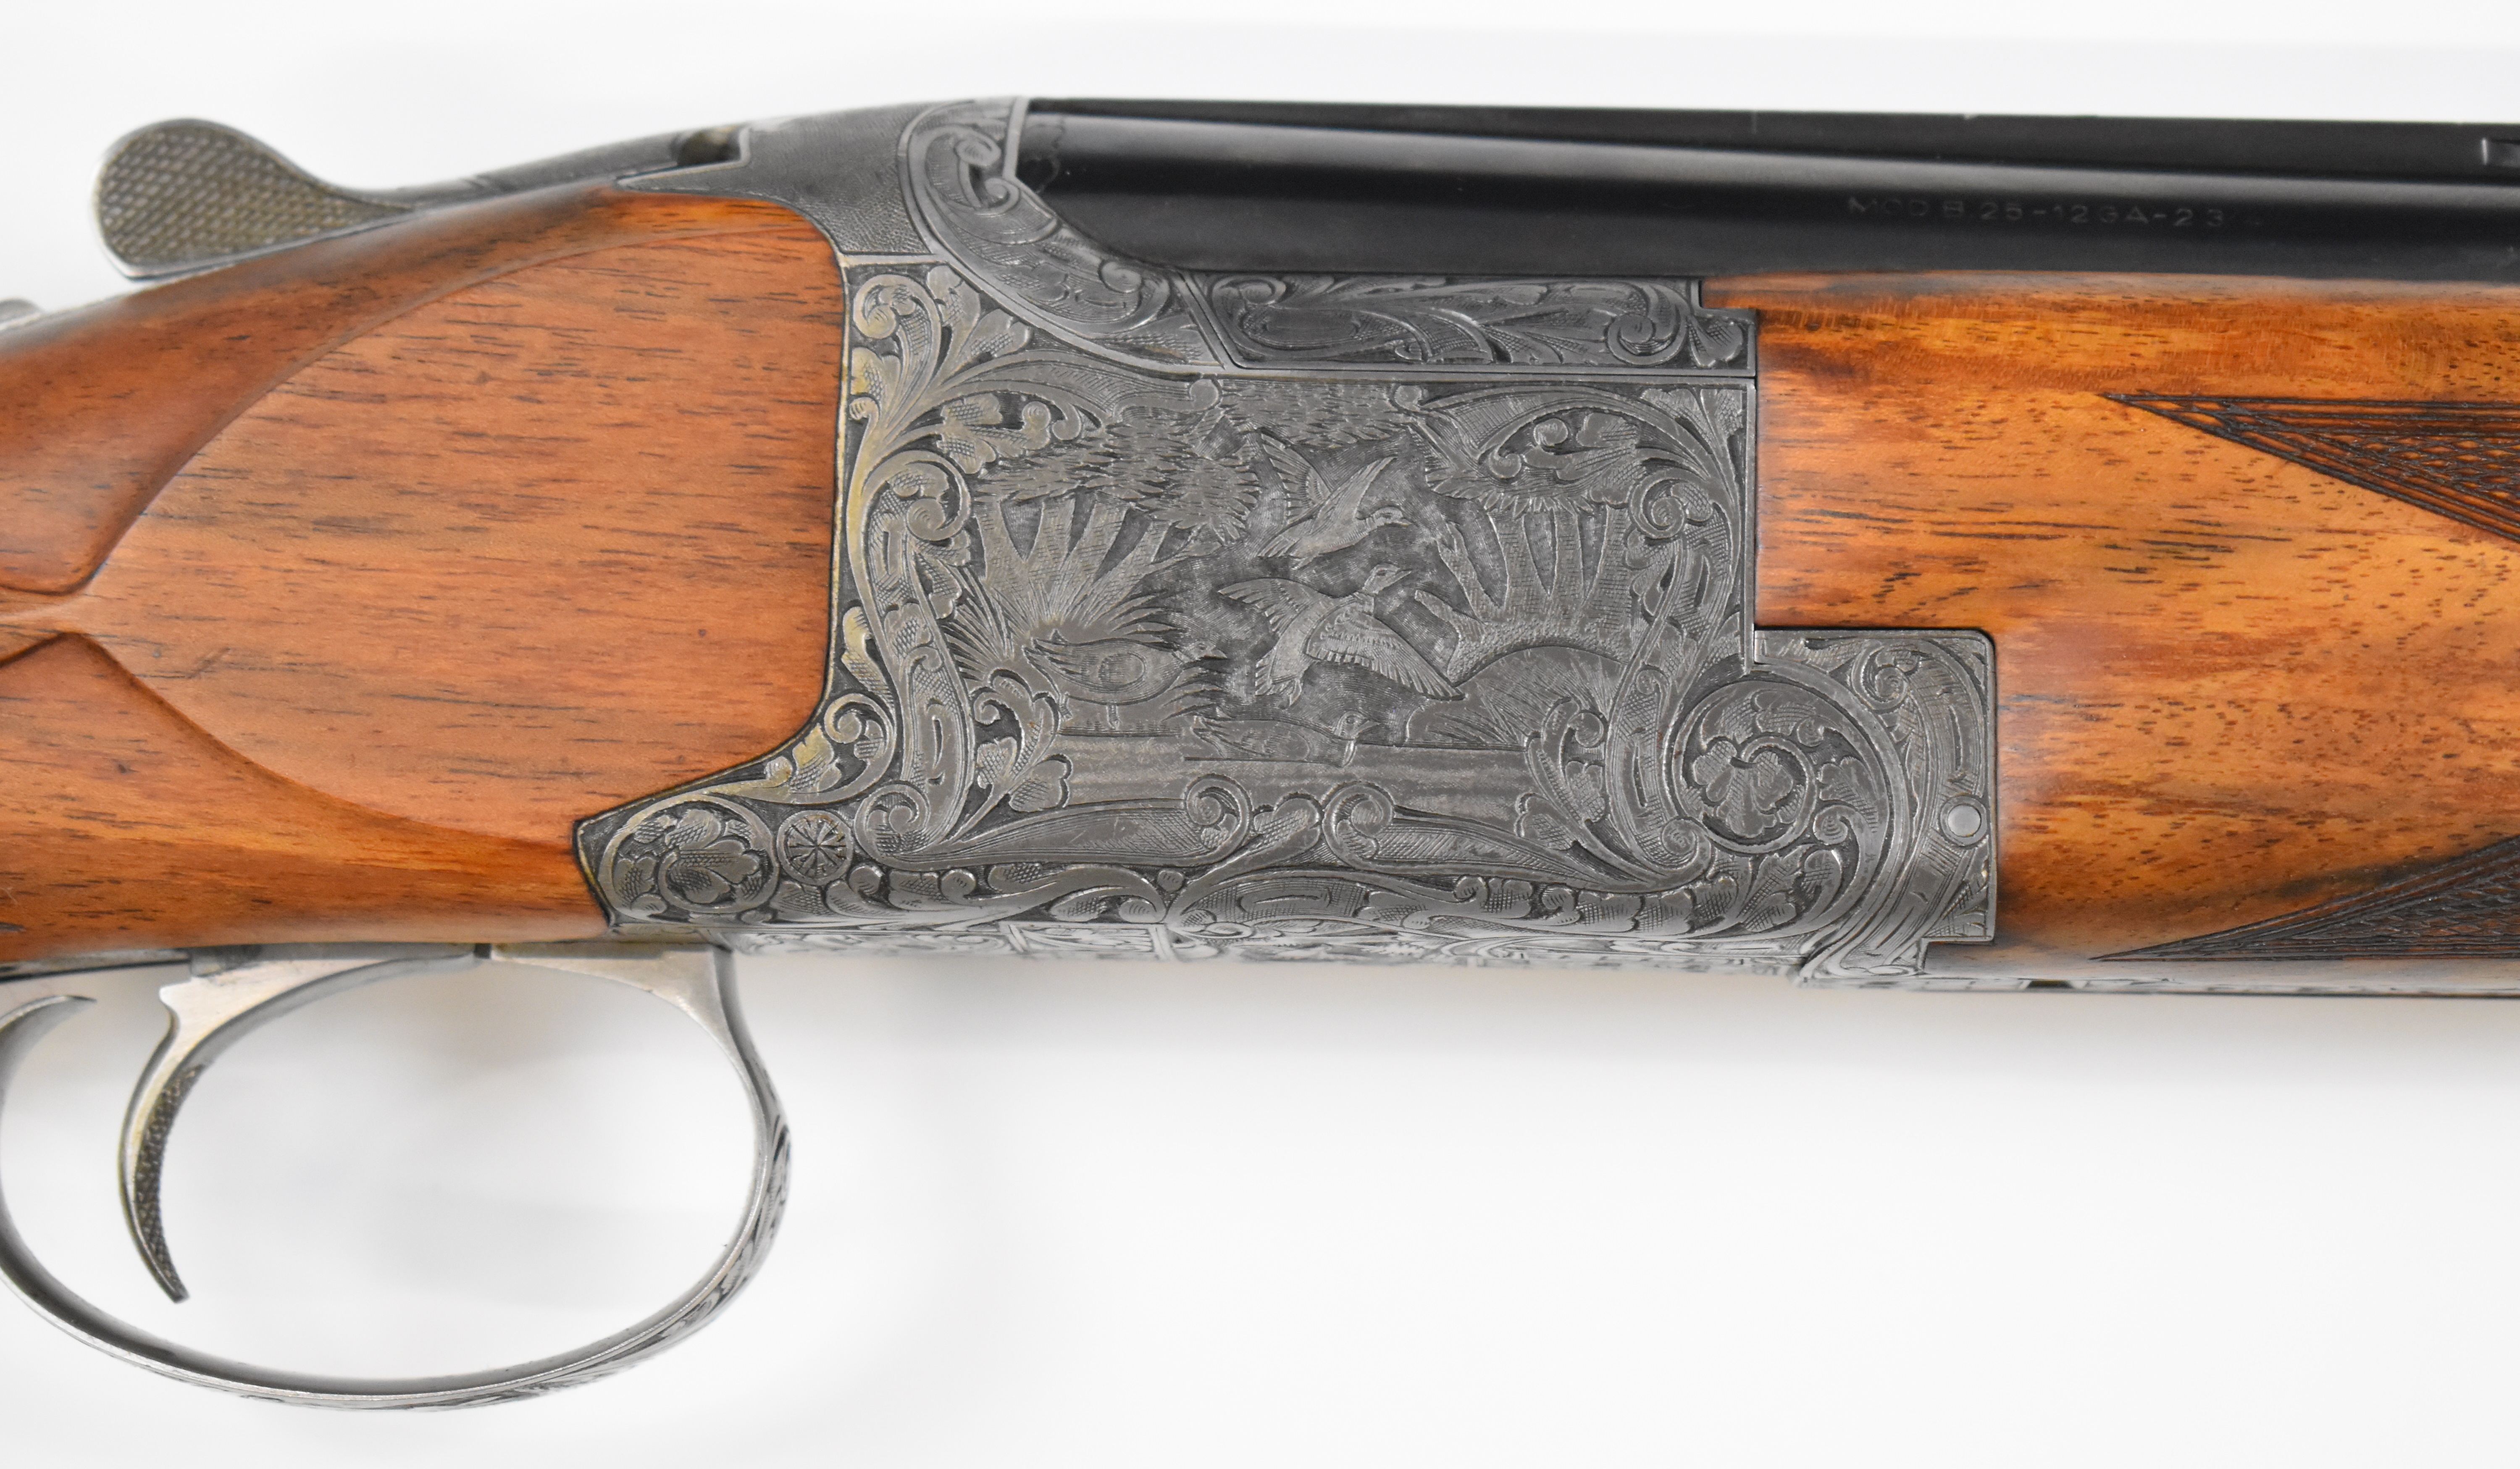 Browning B25 Diana 12 bore over and under ejector shotgun with Pierre Lallemand engraved scenes of - Image 6 of 30